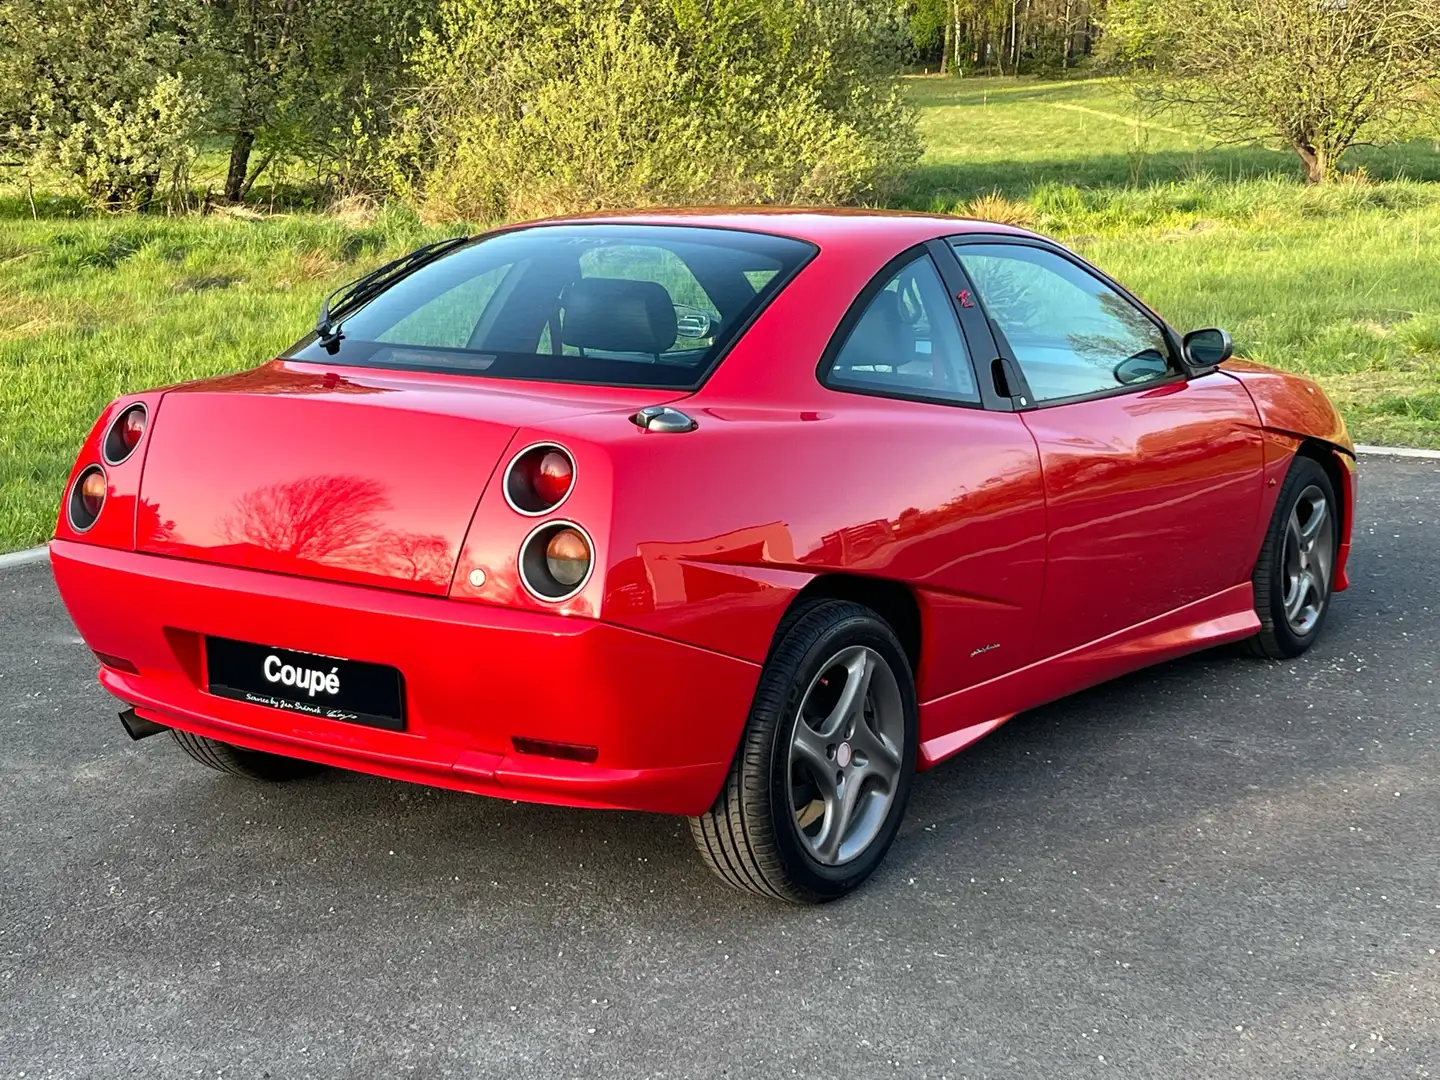 Fiat Coupe 2.0 20 V Turbo Limited Edition crvena - 2